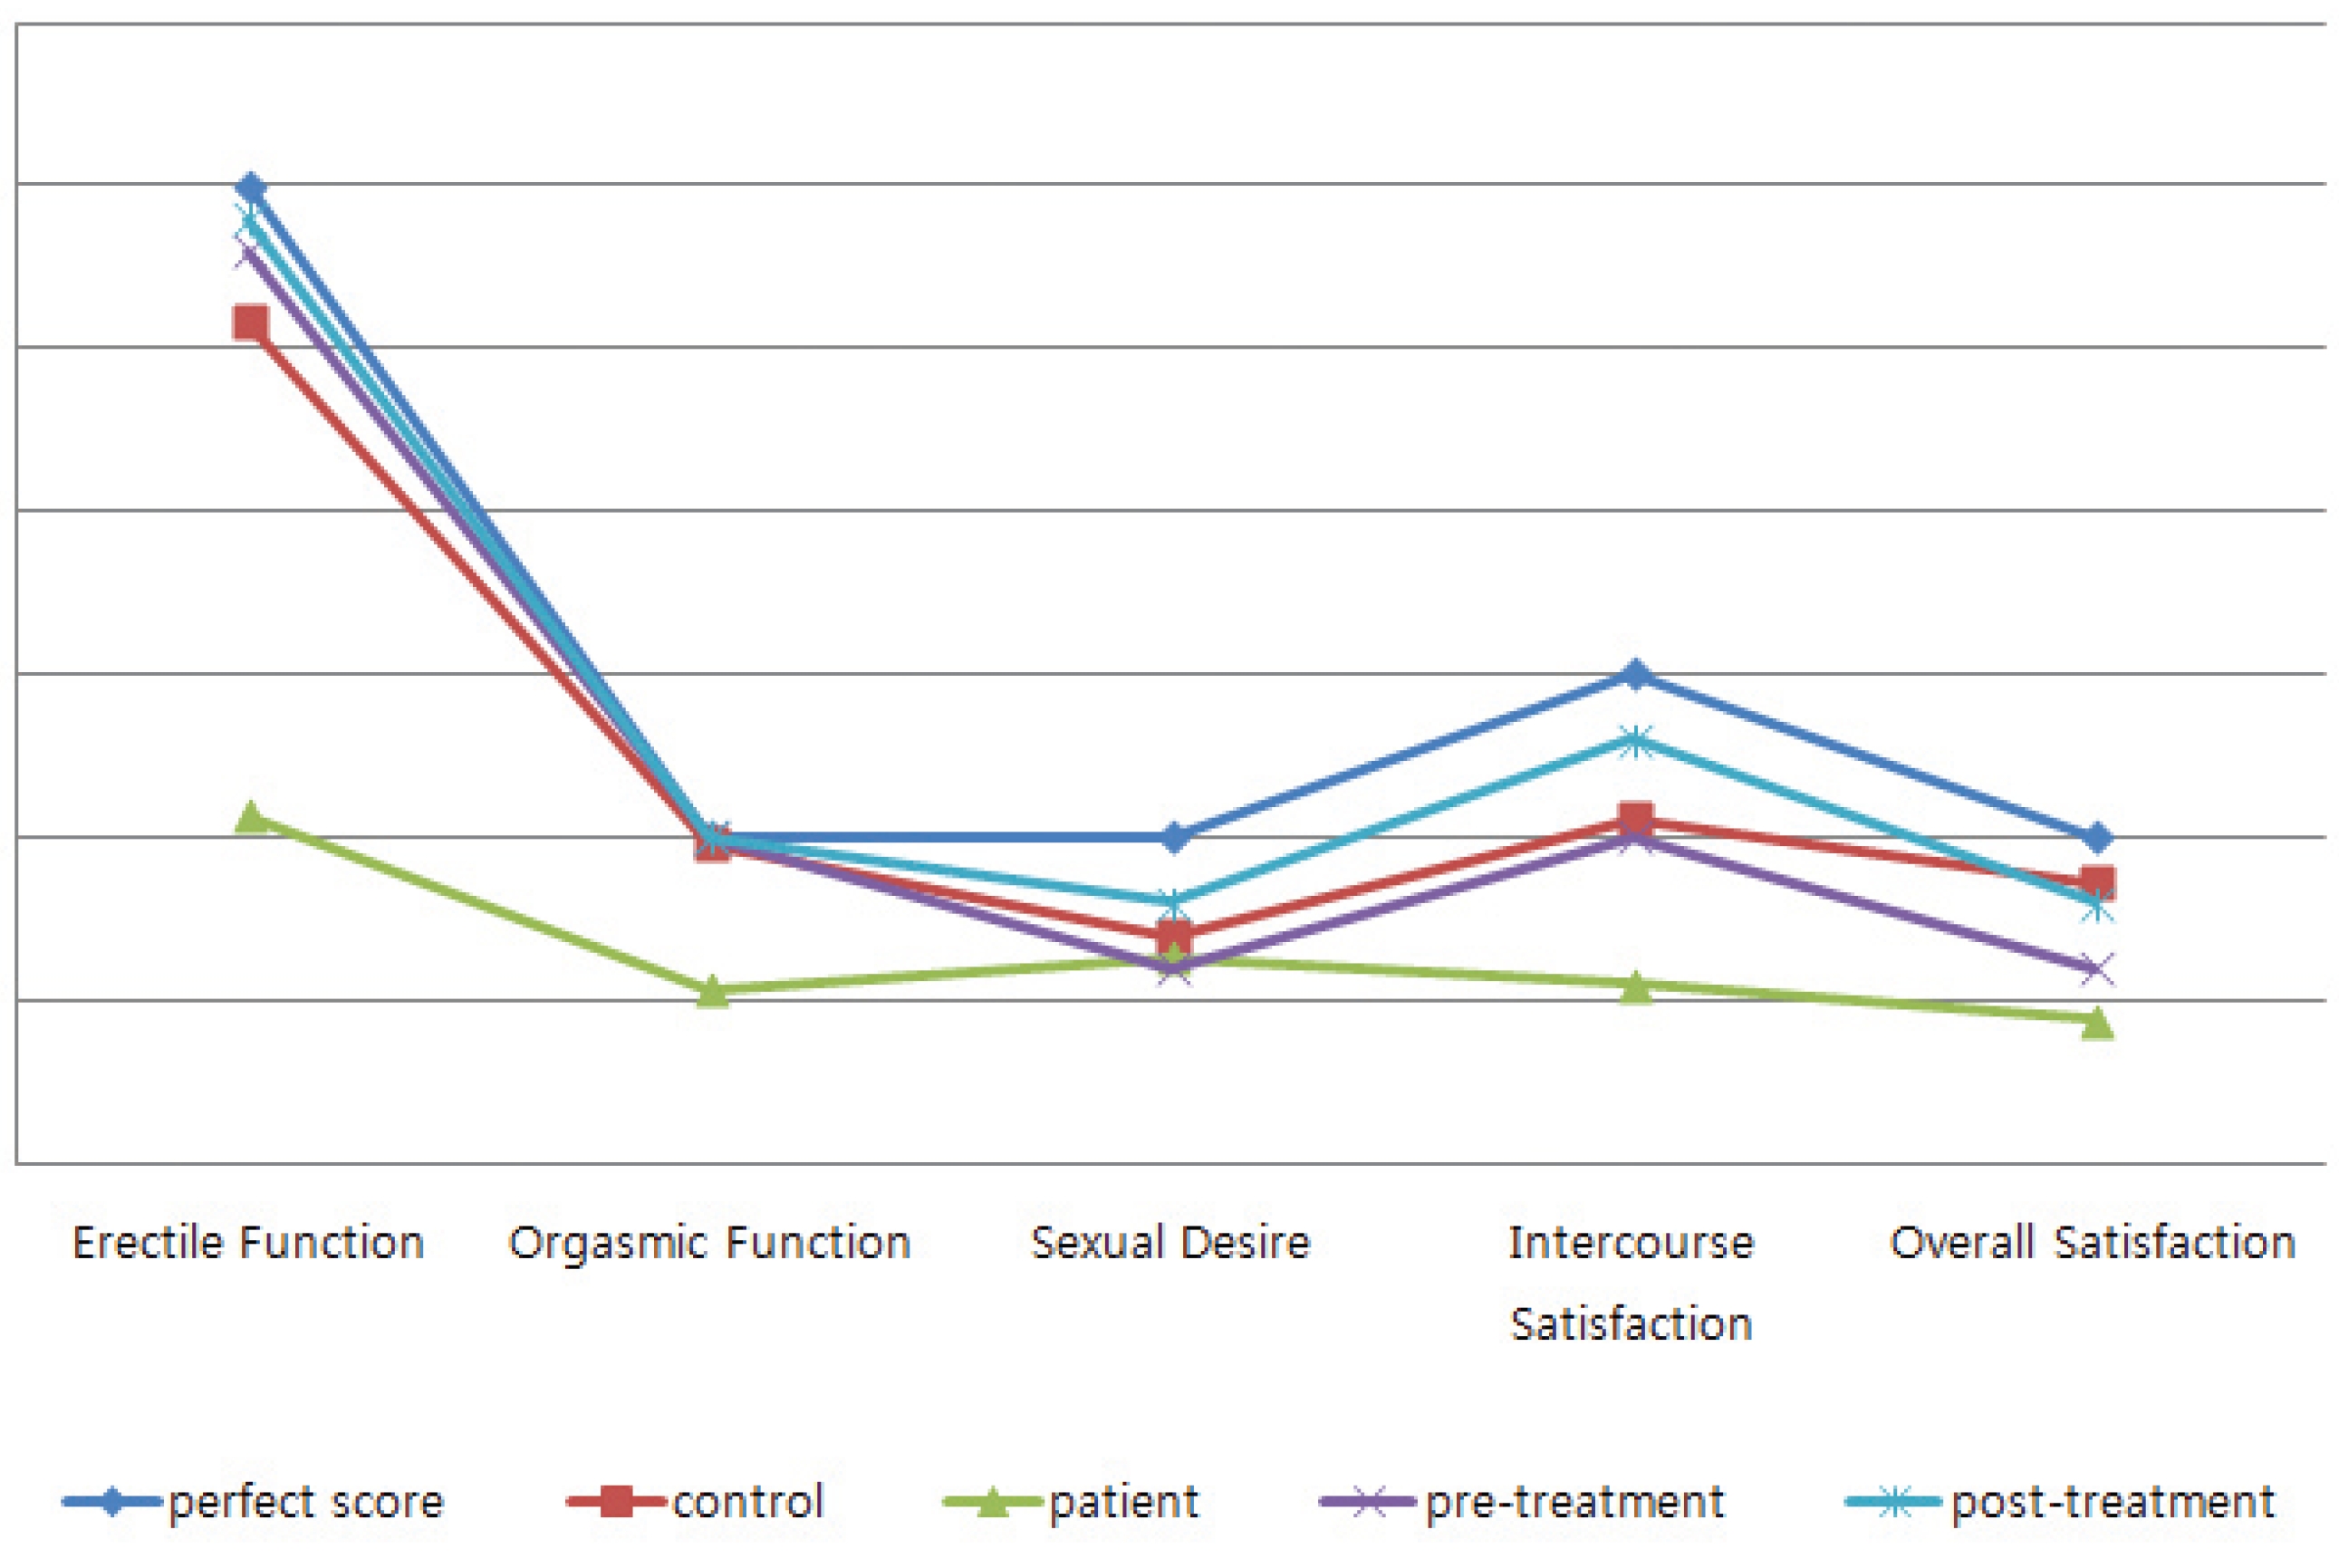 Treatment outcomes on the international index for erectile dysfunction. control, mean value for the control group; patient, mean value
for patients; pre-treatment, value obtained in this case study before treatment; post-treatment, value obtained in this case study after treatment;
The control and the patient were categorized according to [2].